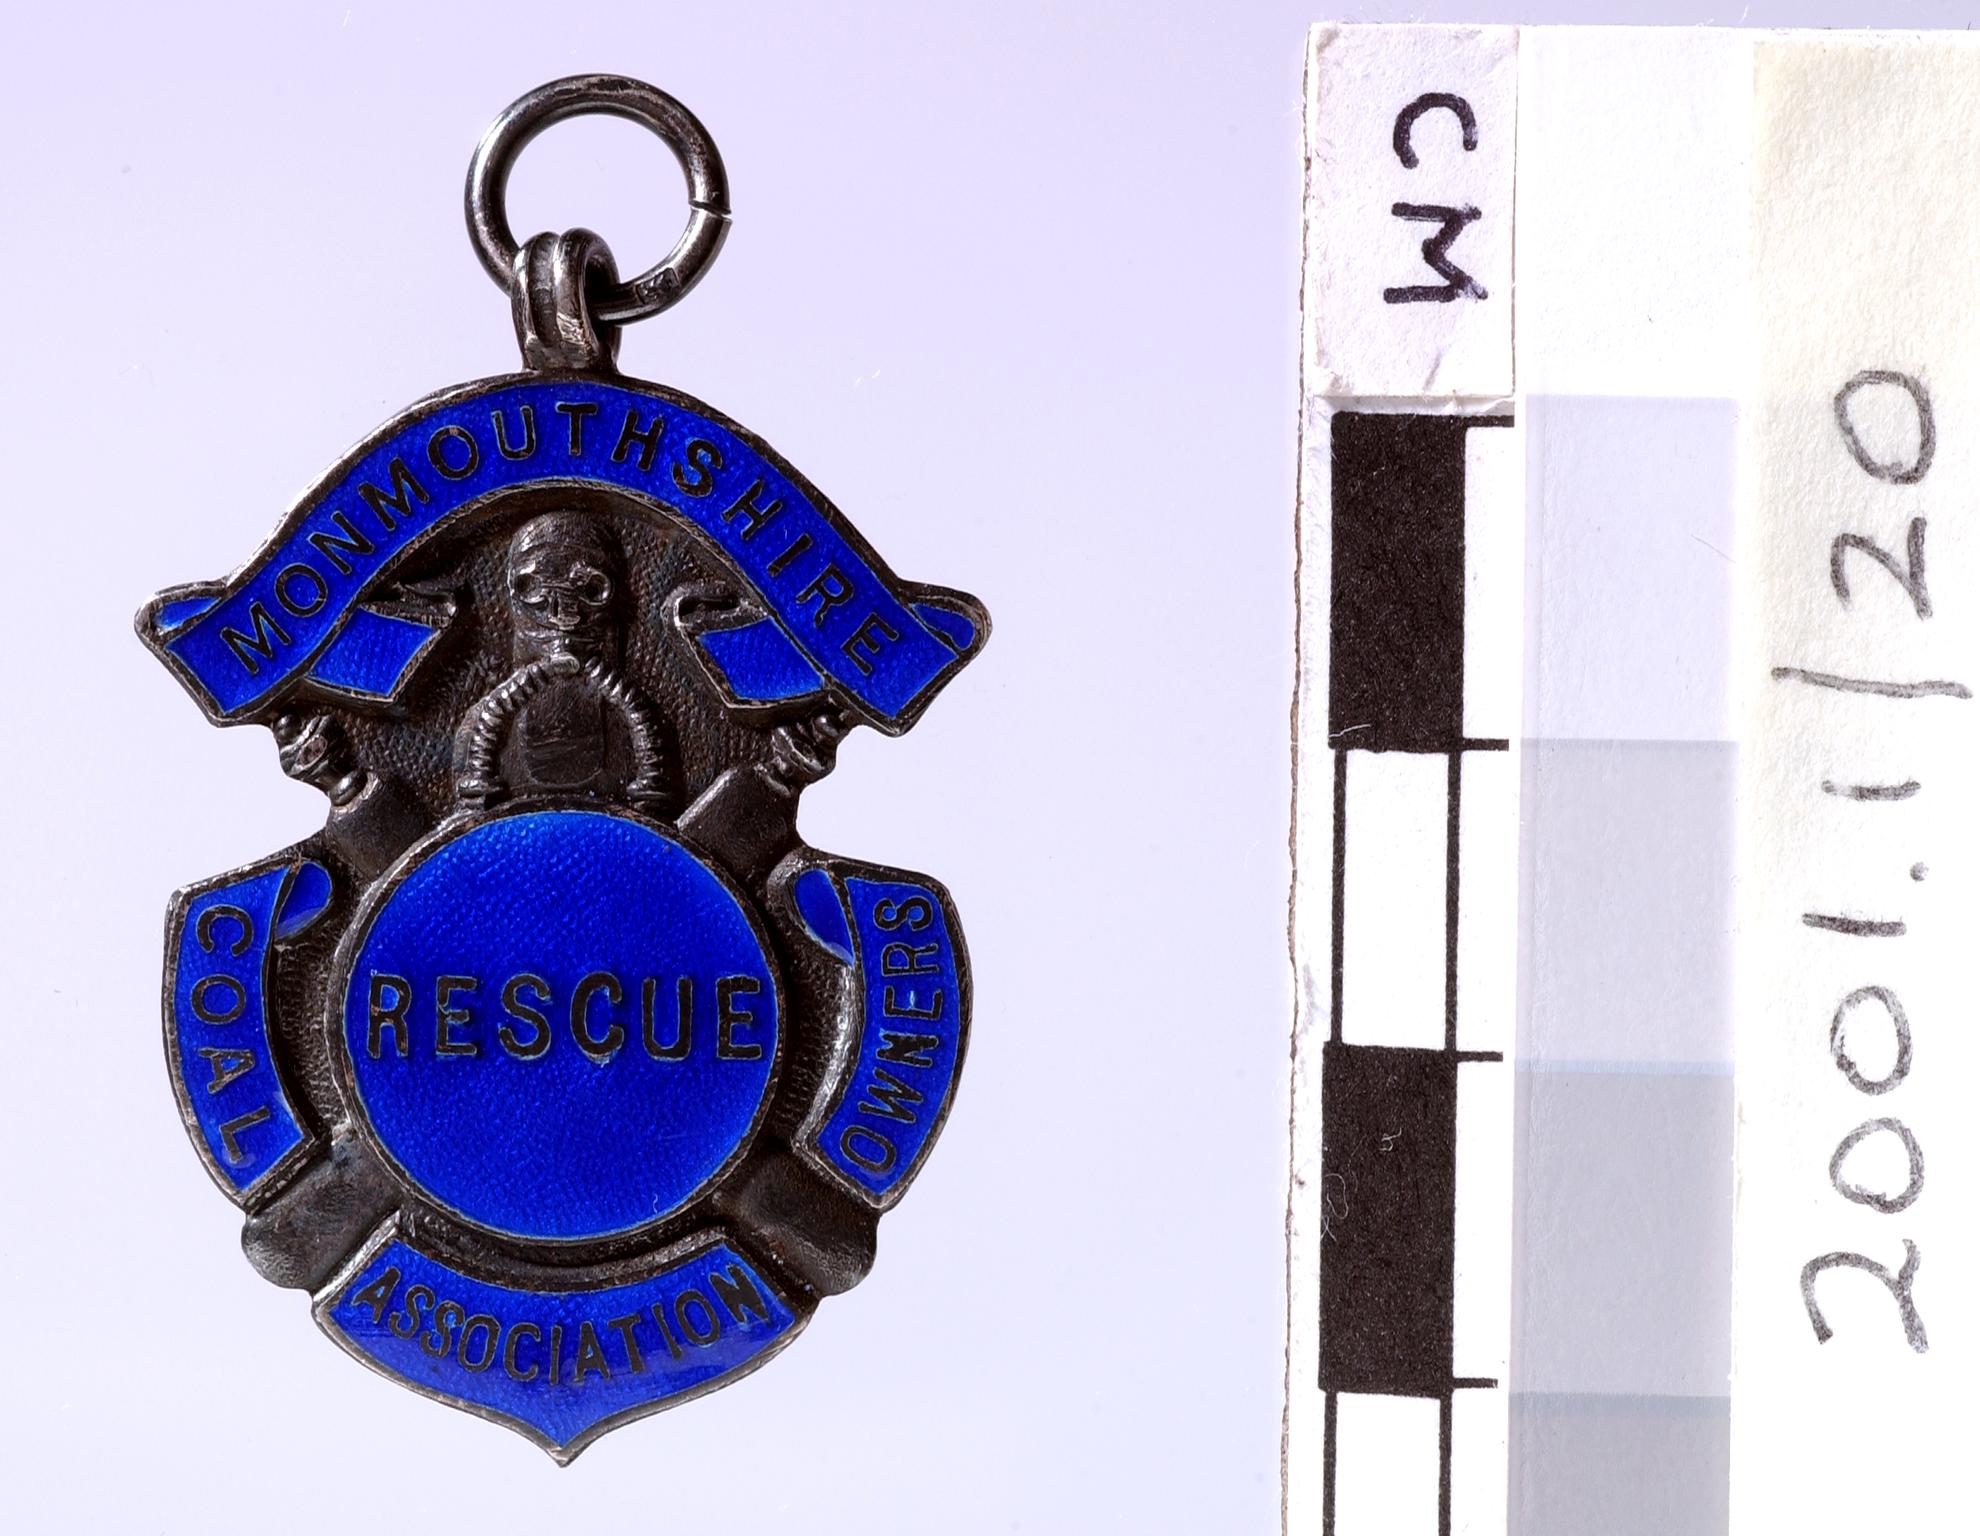 Monmouthshire Coal Owners Association Rescue (badge)